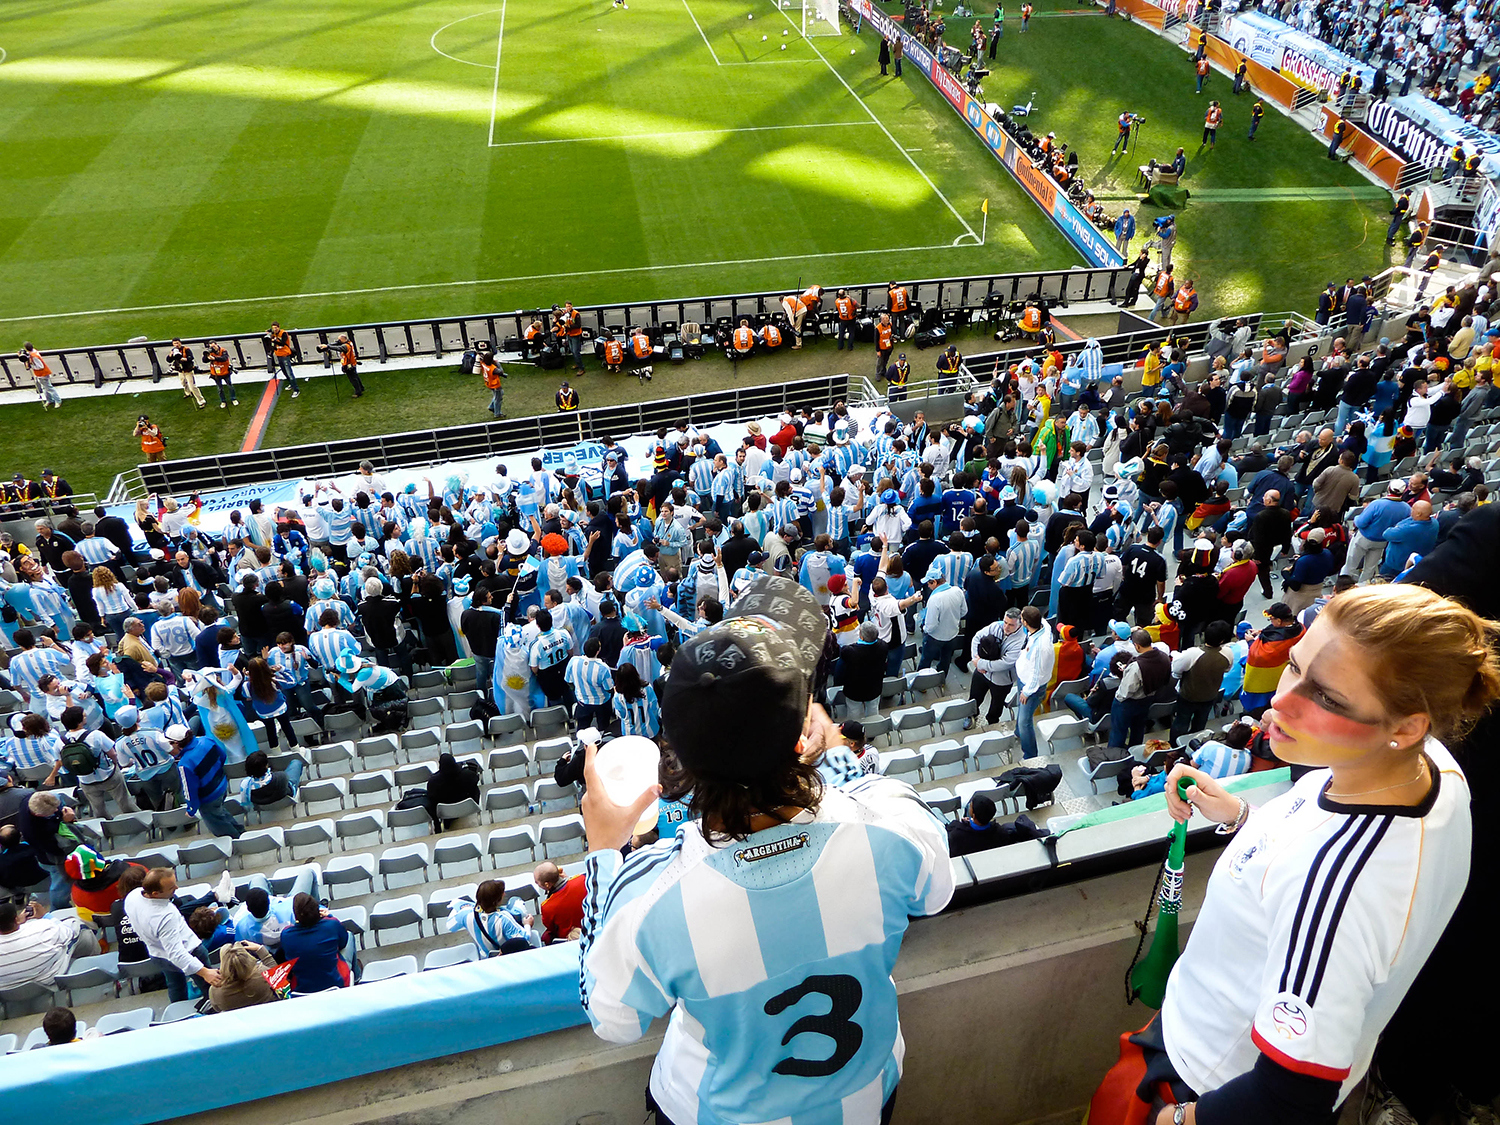 <p>A German fan is slightly outnumbered by Argentine hinchas before their quarter-final match in the 2010 World Cup. The match ended 0-4 to the Germans.</p>